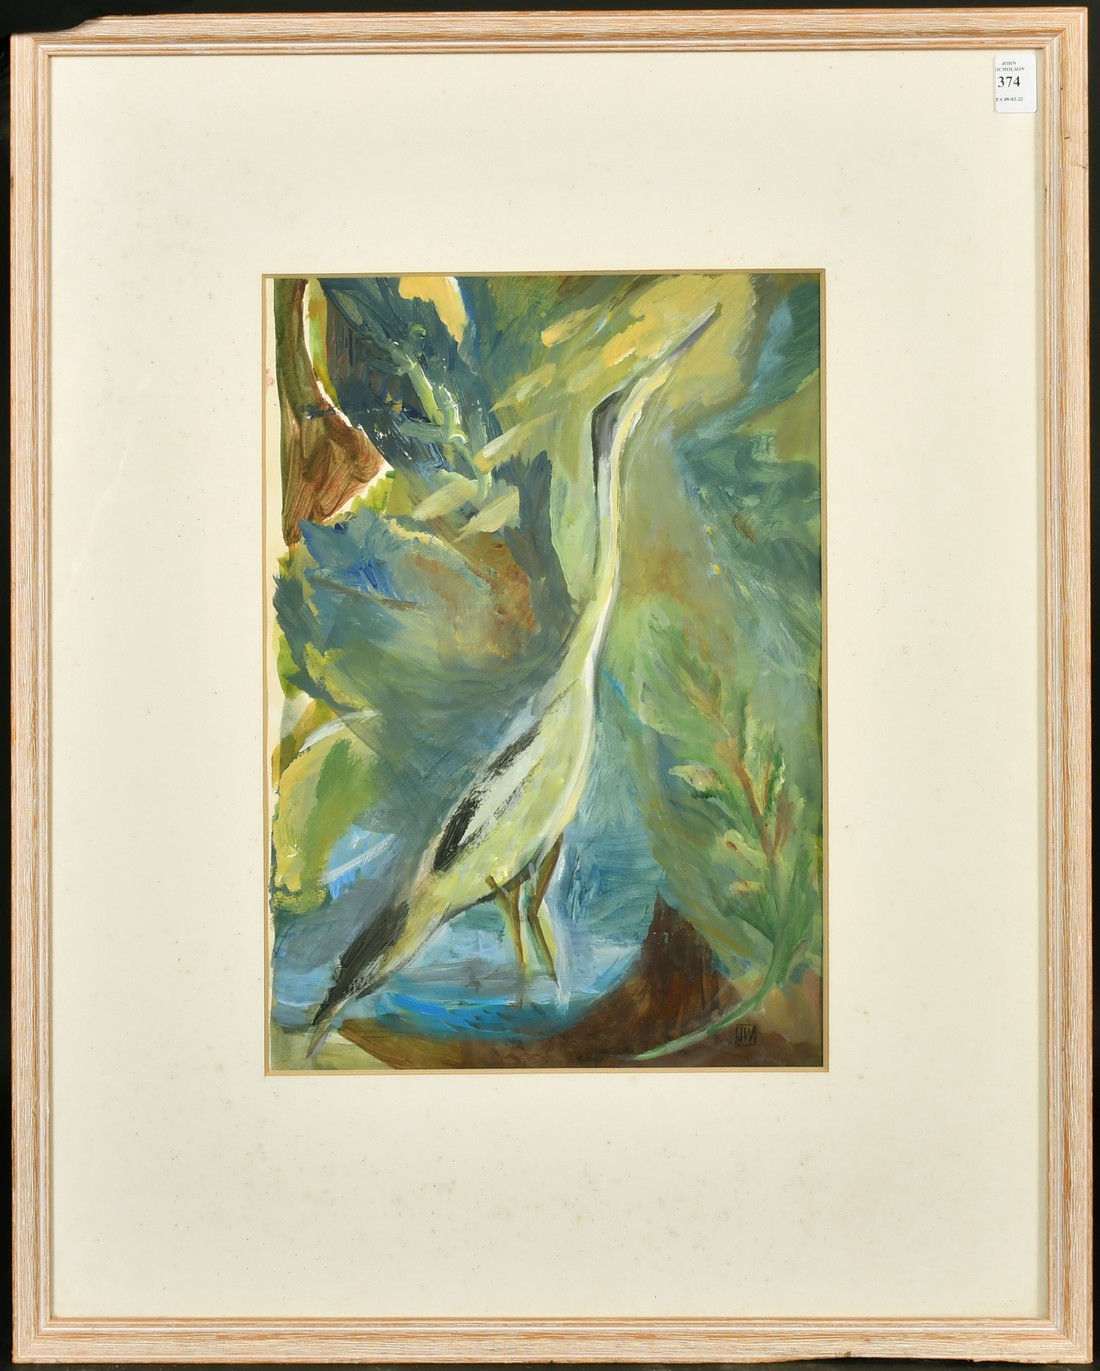 Jean Webster, 'Heron in caves of Green' acrylic on paper, signed with monogram, titled on label - Image 2 of 4